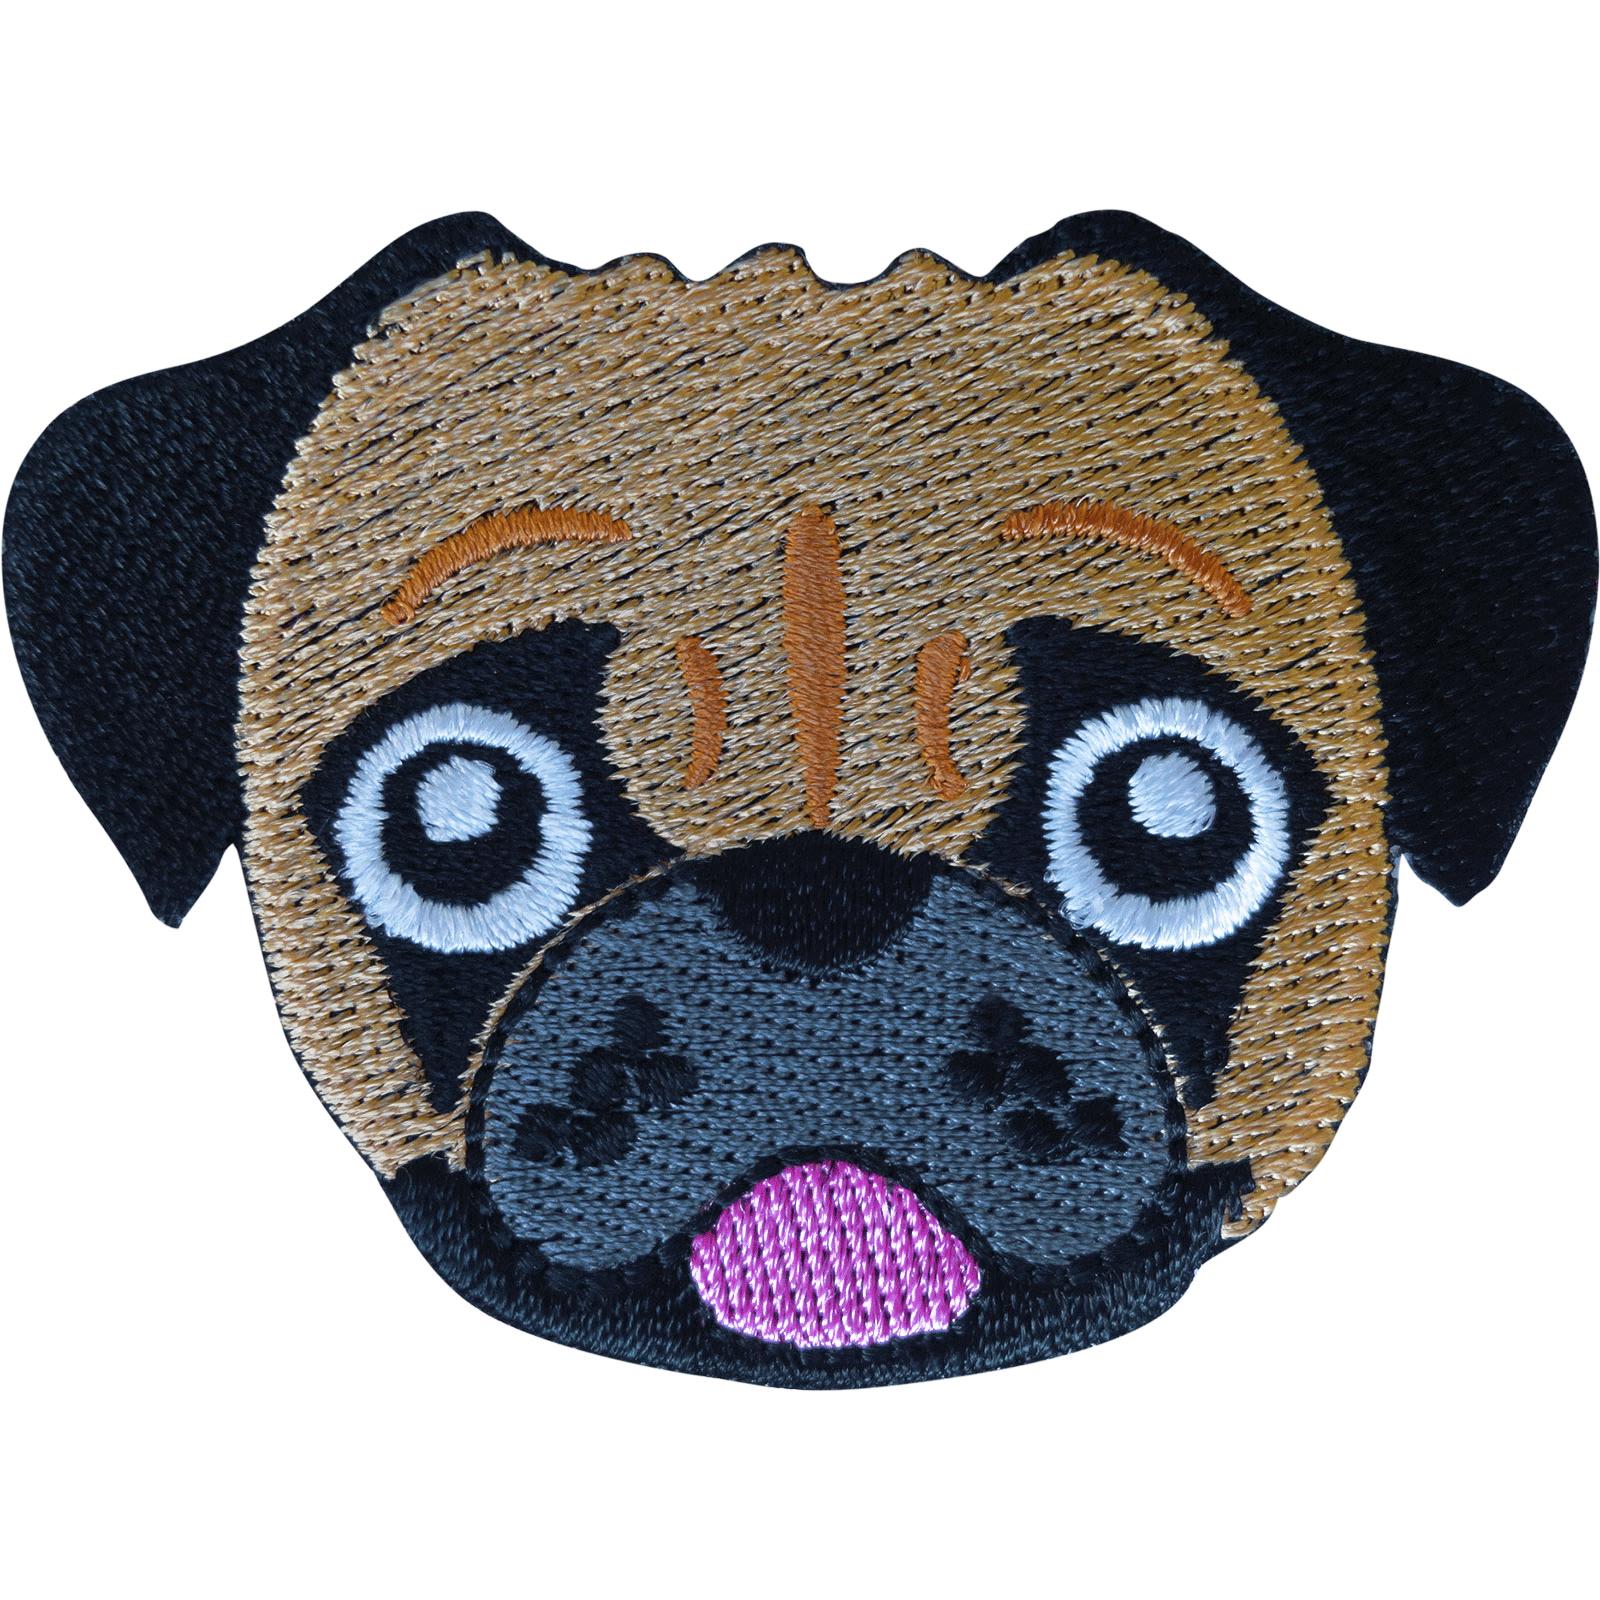 Boxer Bulldog Pug Patch Iron Sew On Clothes Bag Dog Embroidered Badge Applique